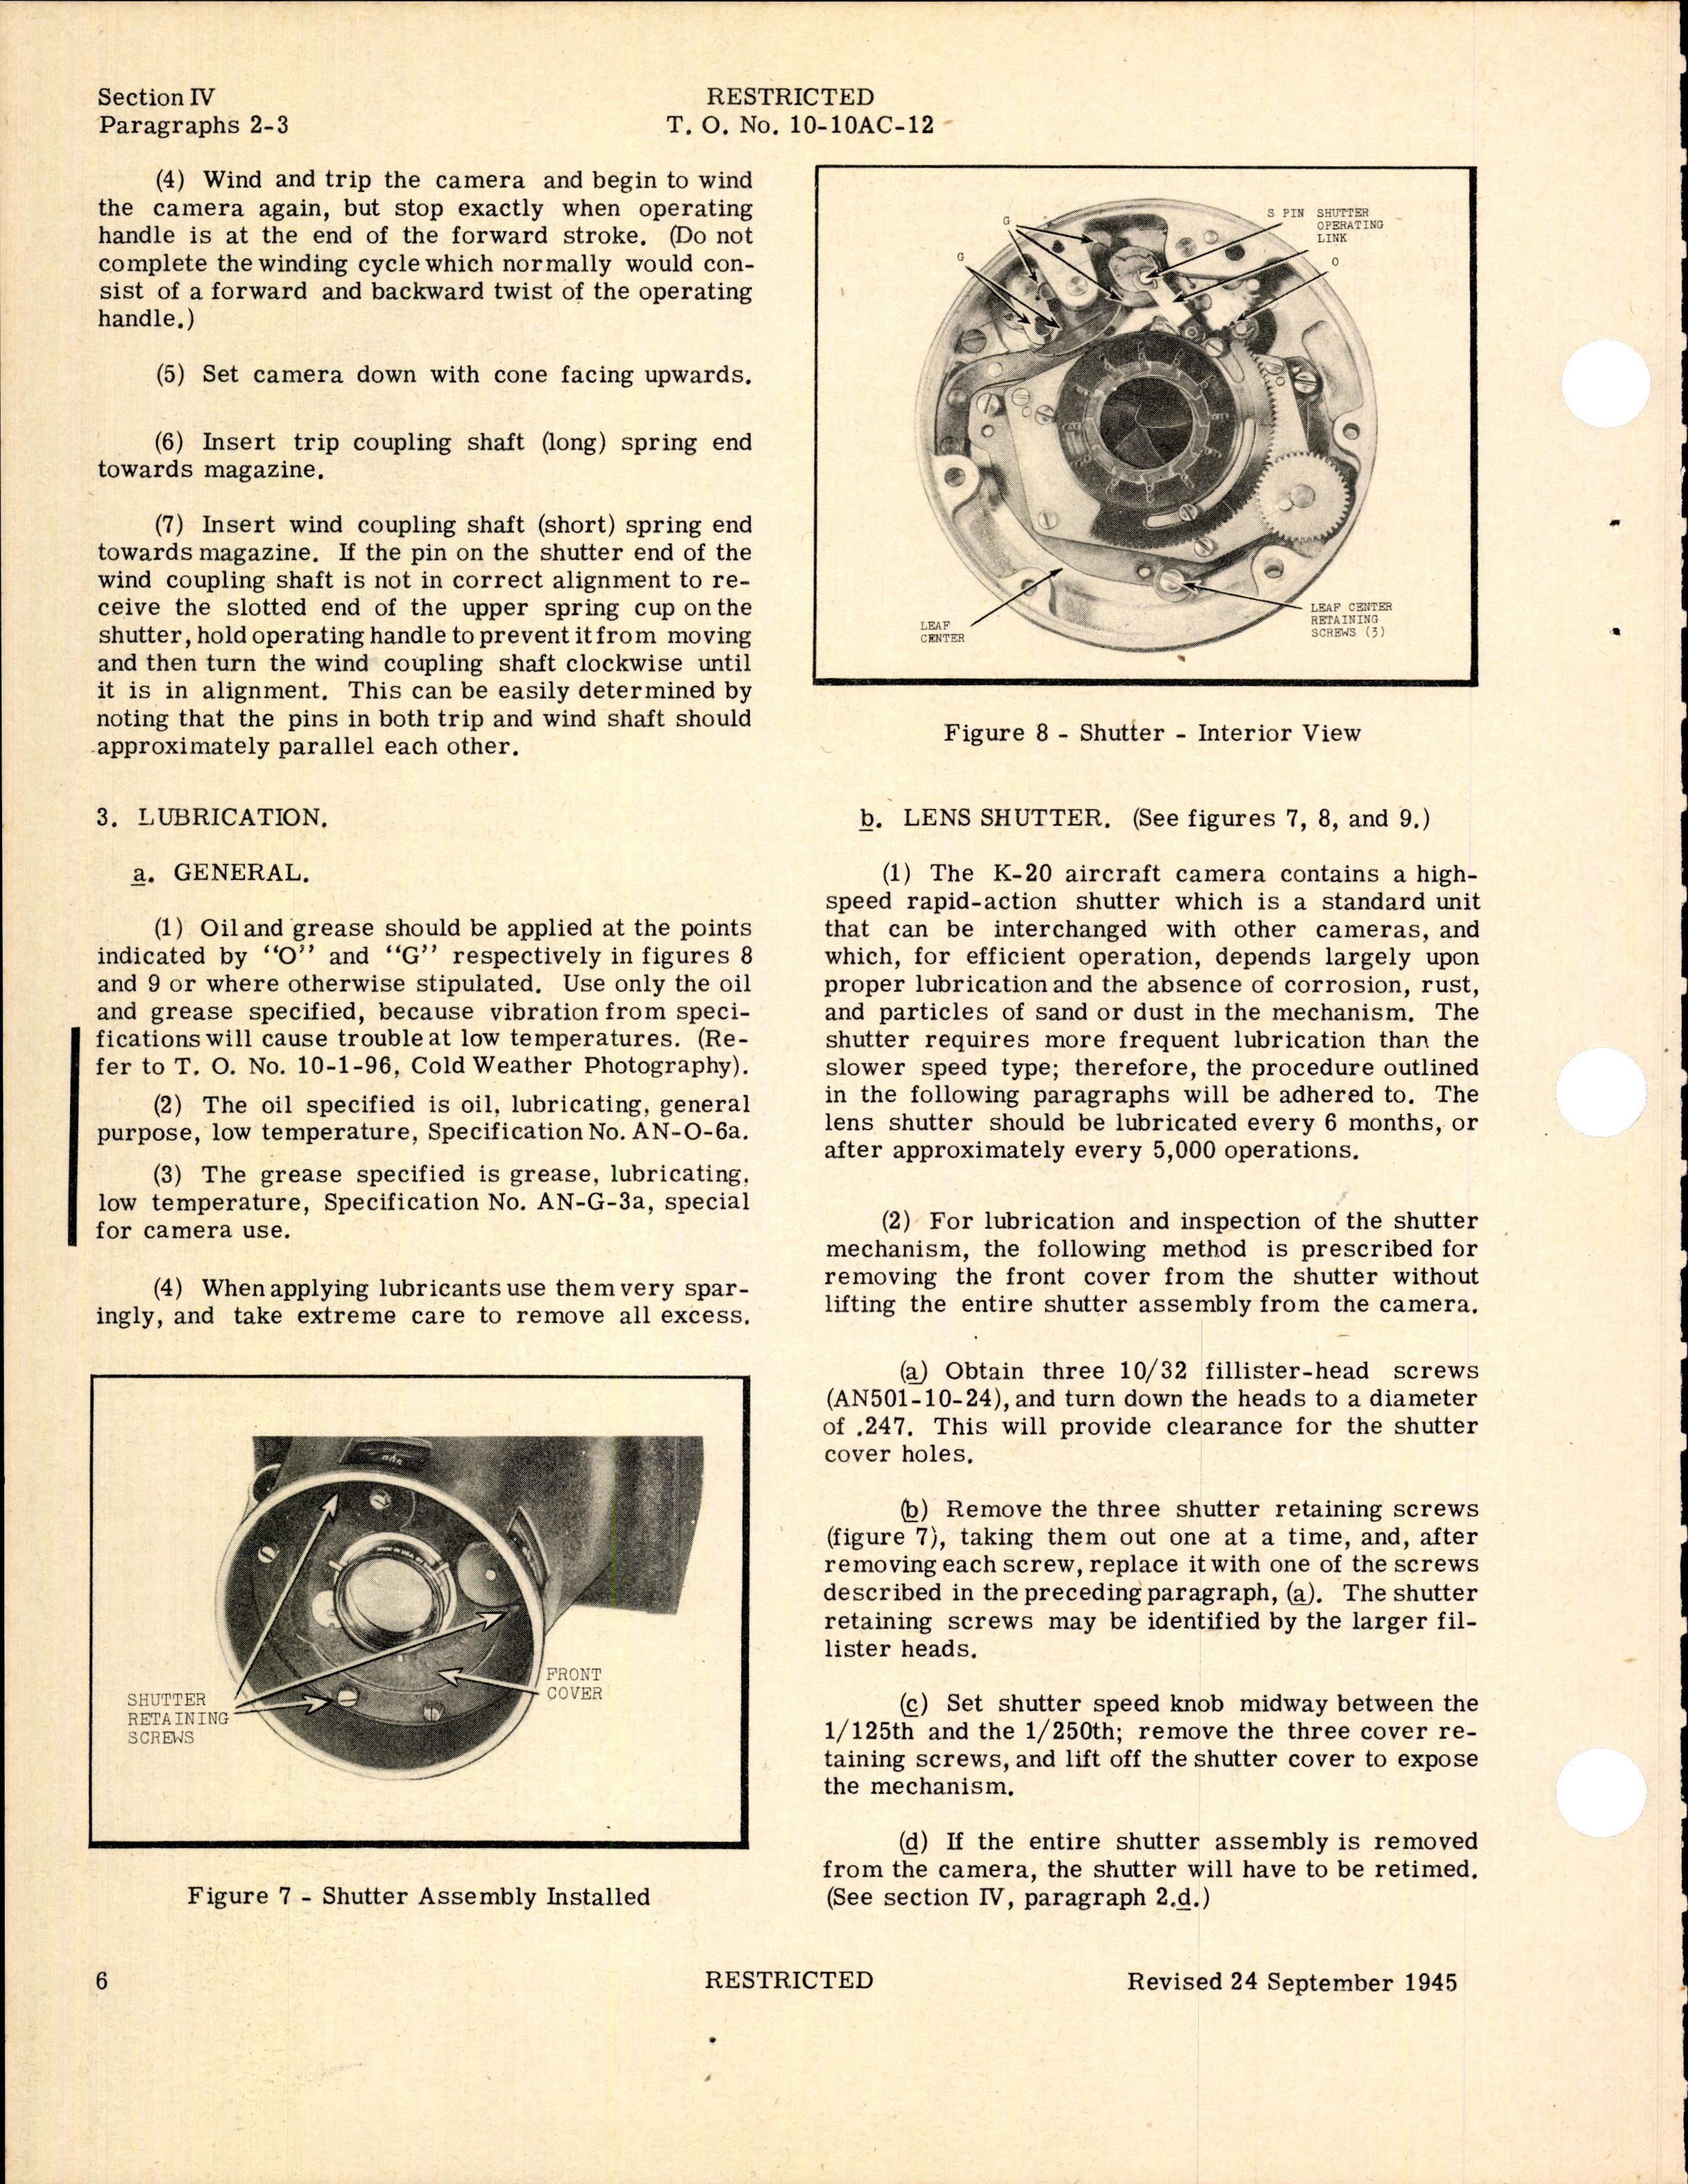 Sample page 8 from AirCorps Library document: Oper, Service & Overhaul w/ Parts Catalog for Type K-20 Aircraft Camera